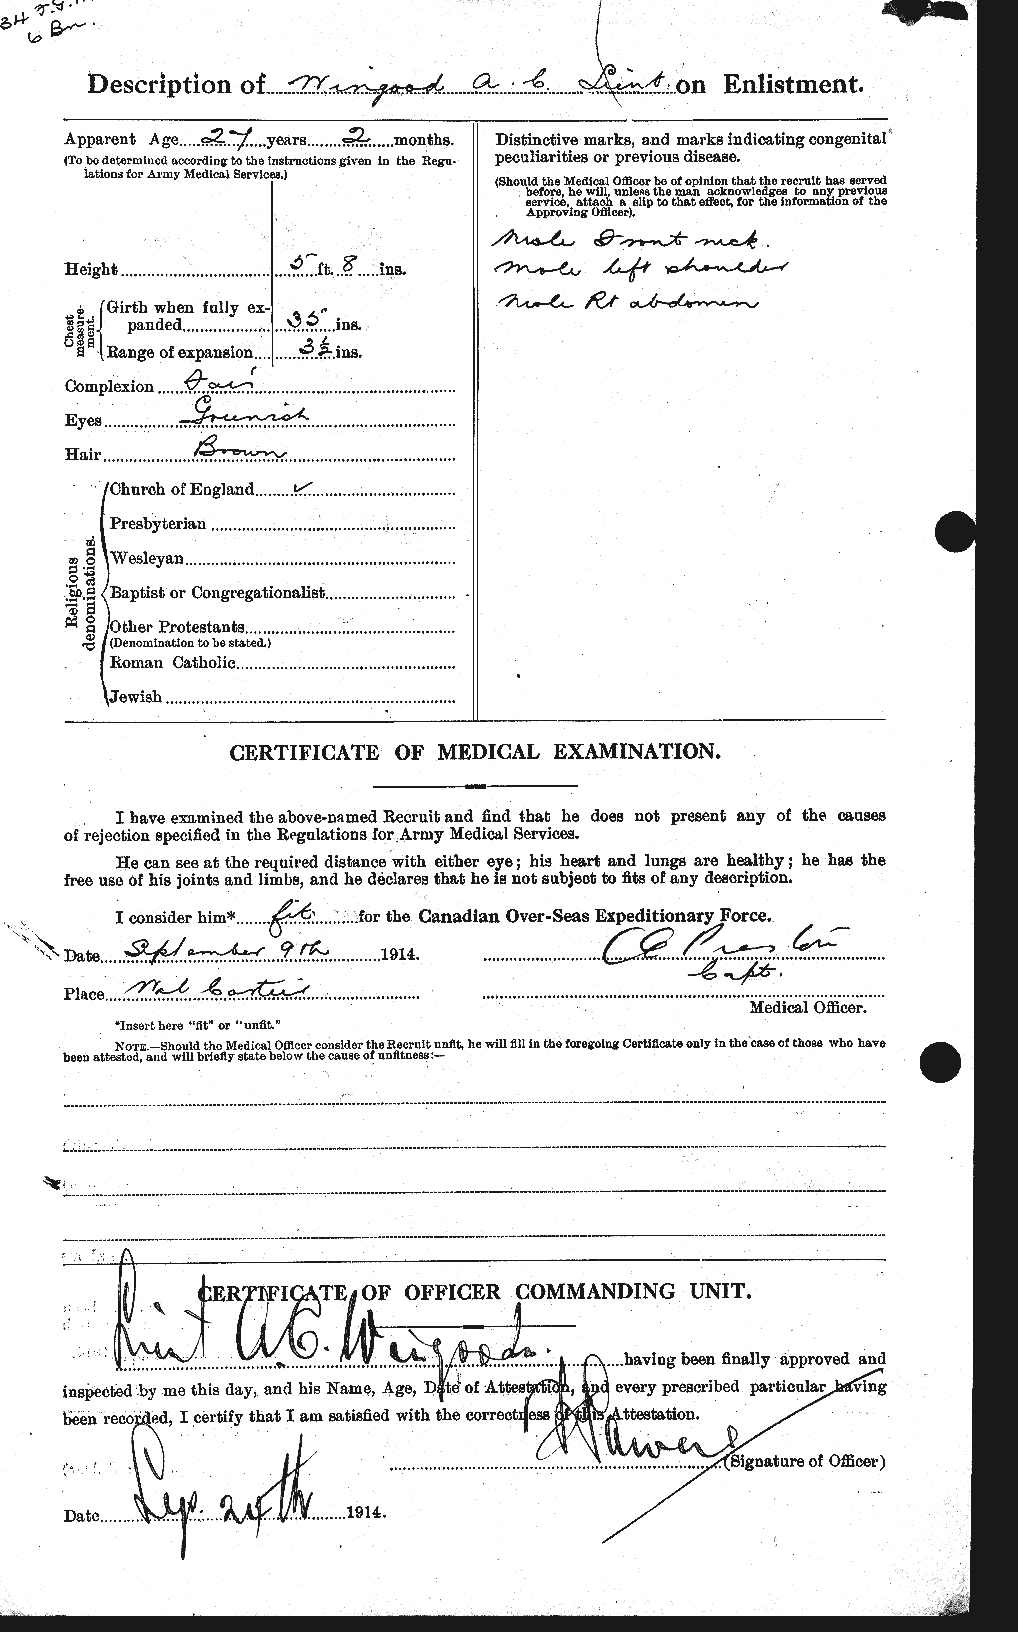 Personnel Records of the First World War - CEF 679019b